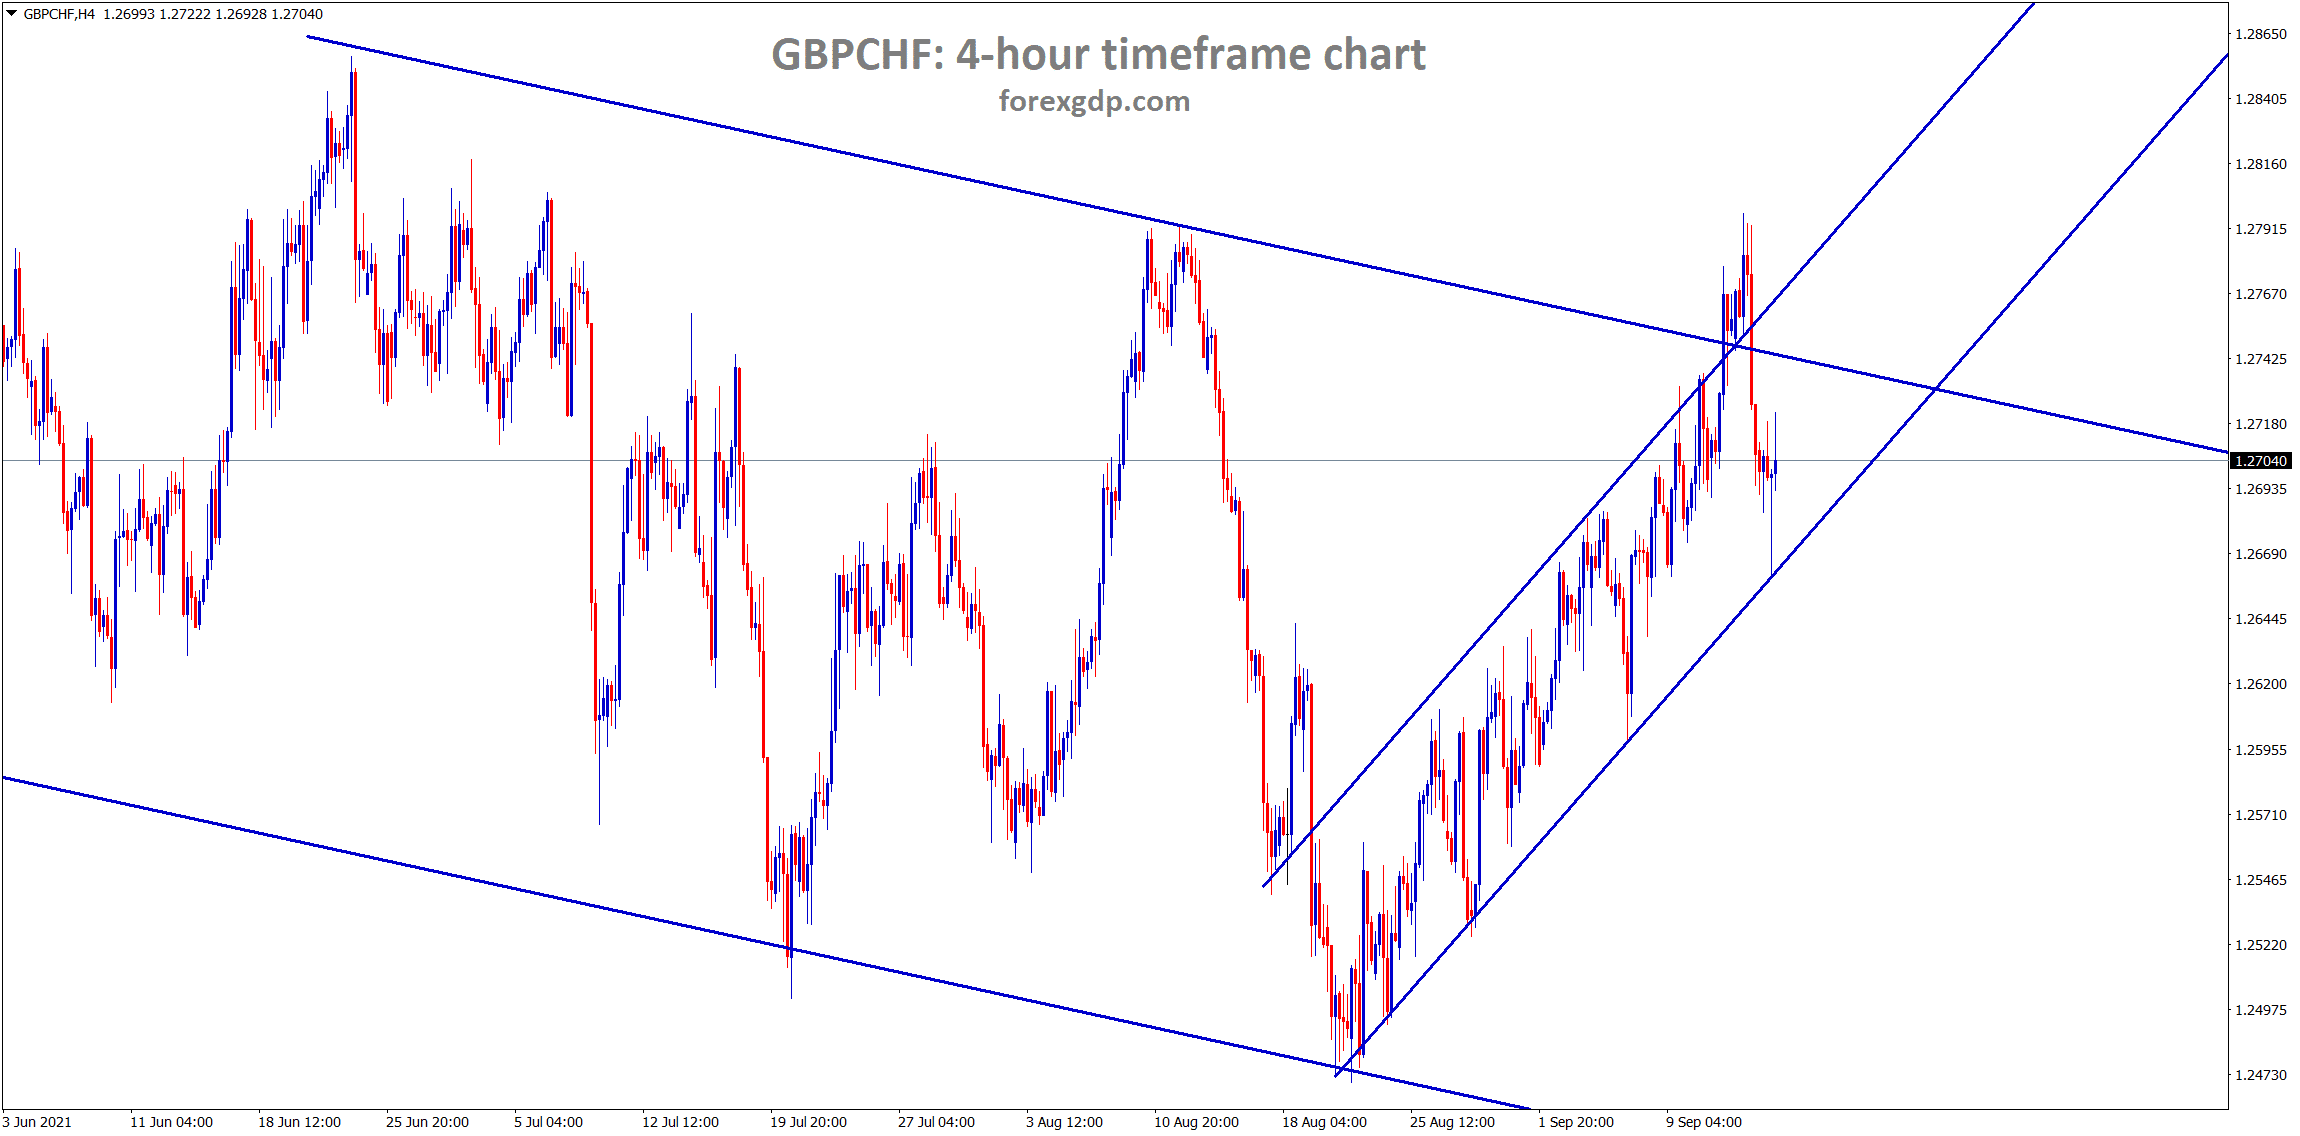 GBPCHF is still moving in an Ascending channel for a long time